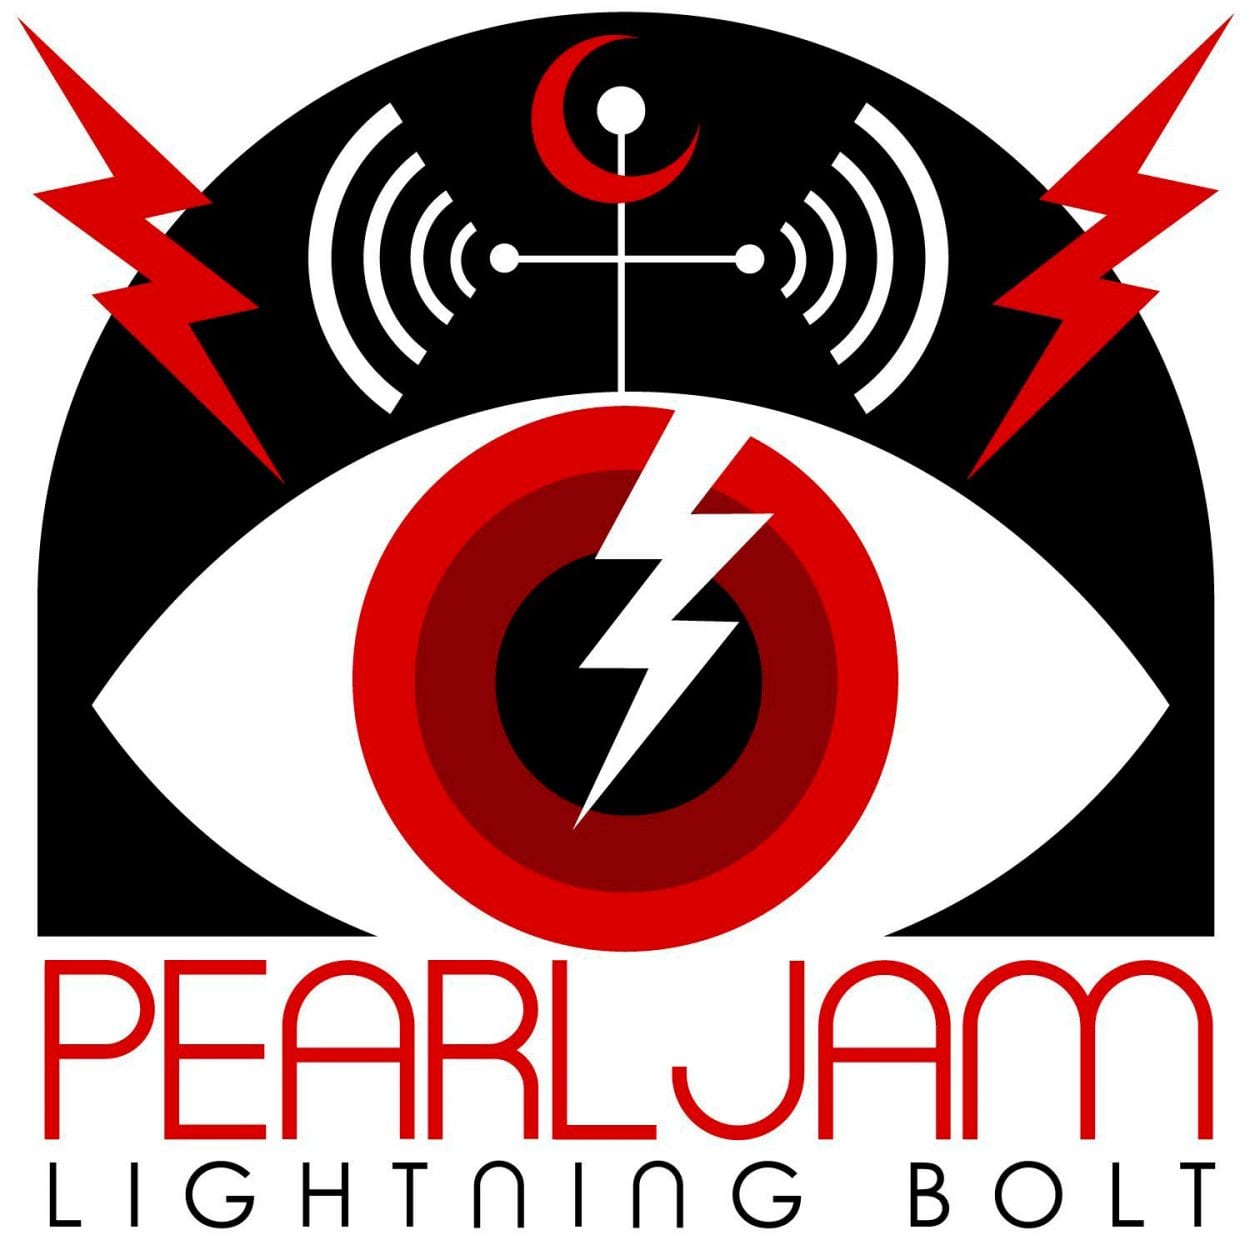 Art deco stylings of an eyeball with a red iris, and a white lightning bolt Image on it. An antenna is above it, appearing to broadcast signals from it.